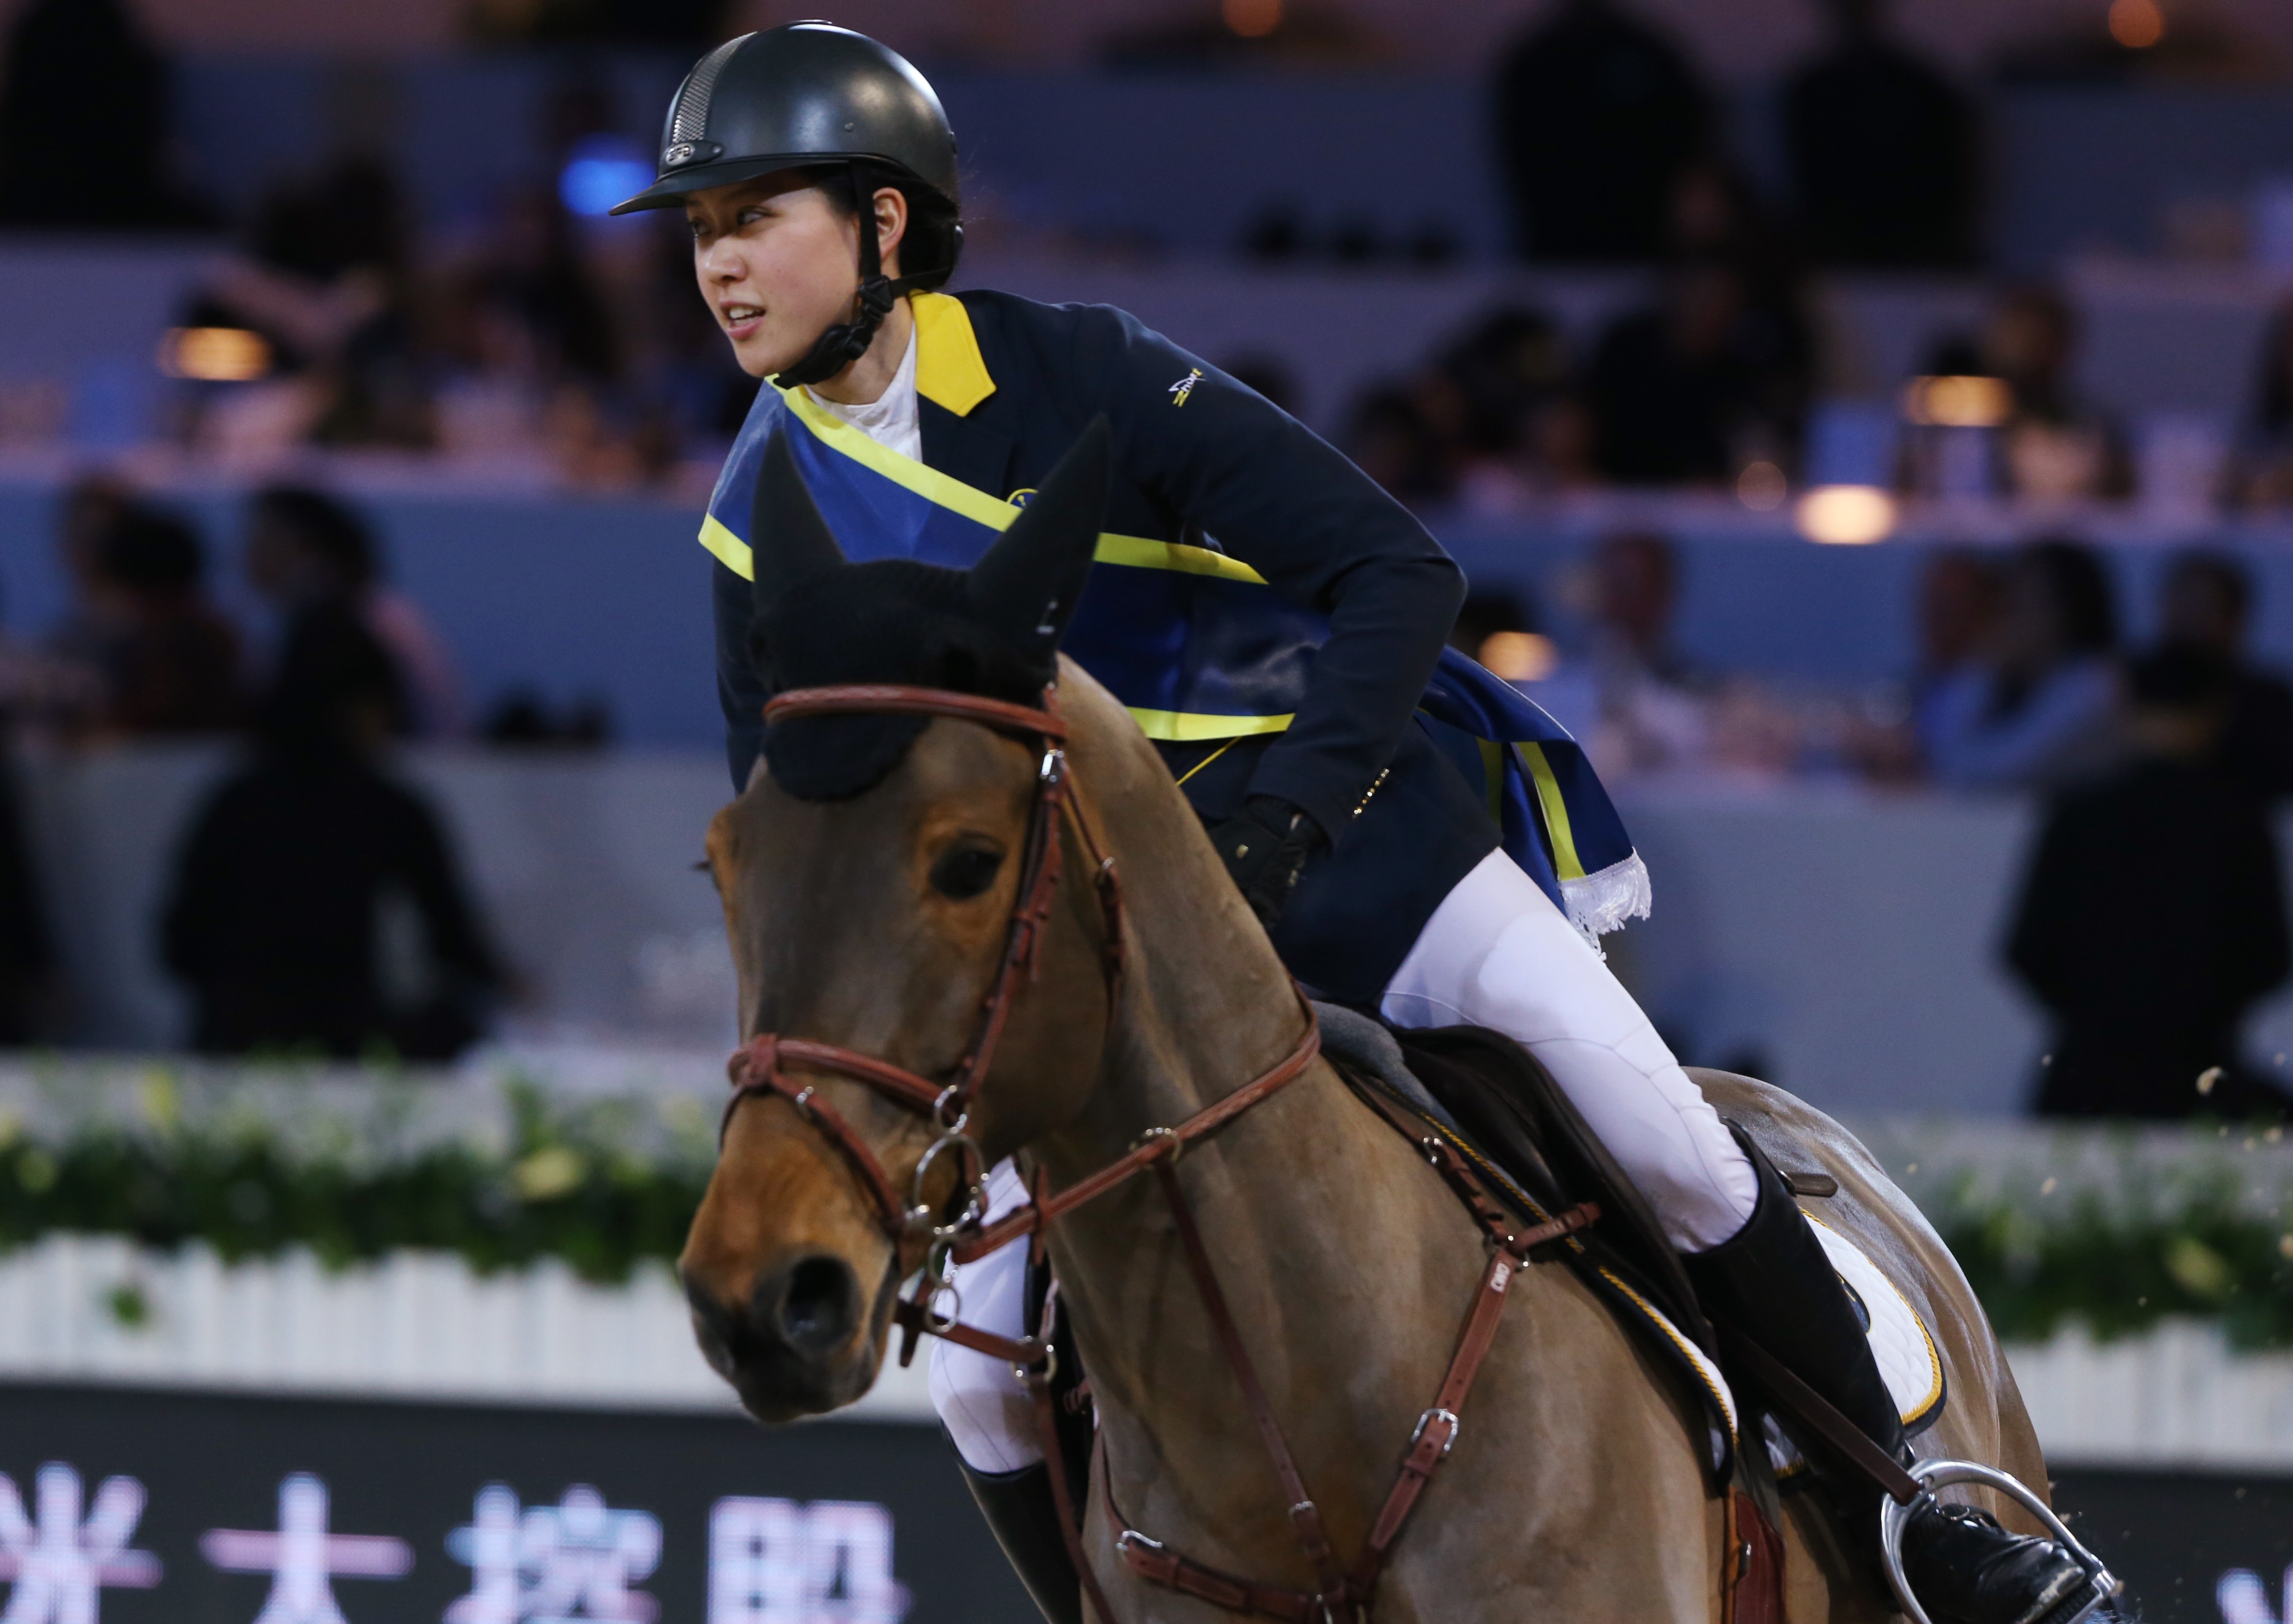 Hong Kong’s Jacqueline Lai competes on the final day of the Longines Masters. Photo: Sam Tsang